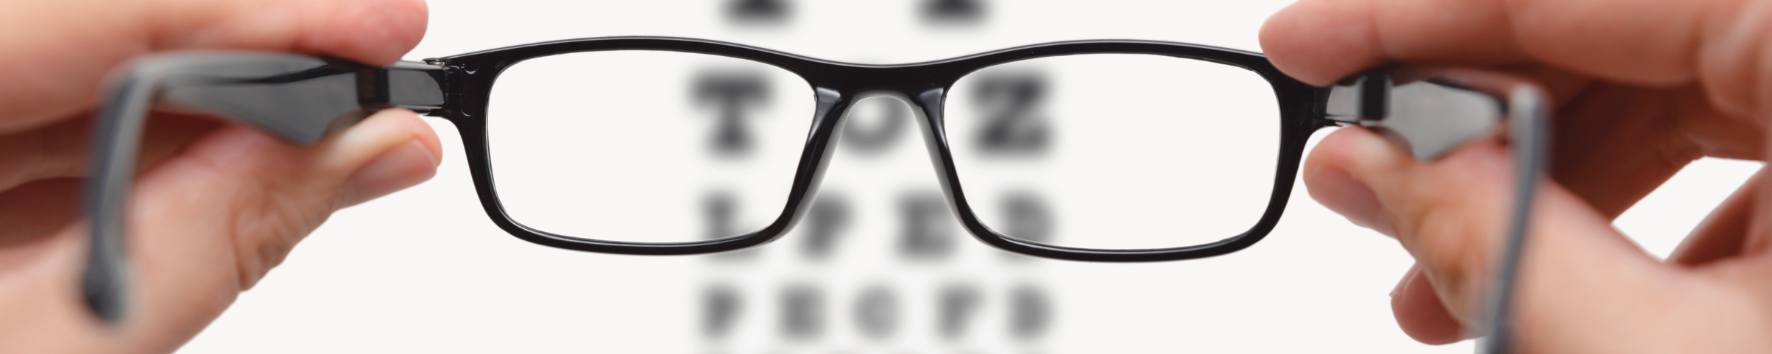 Eye Health test with glasses